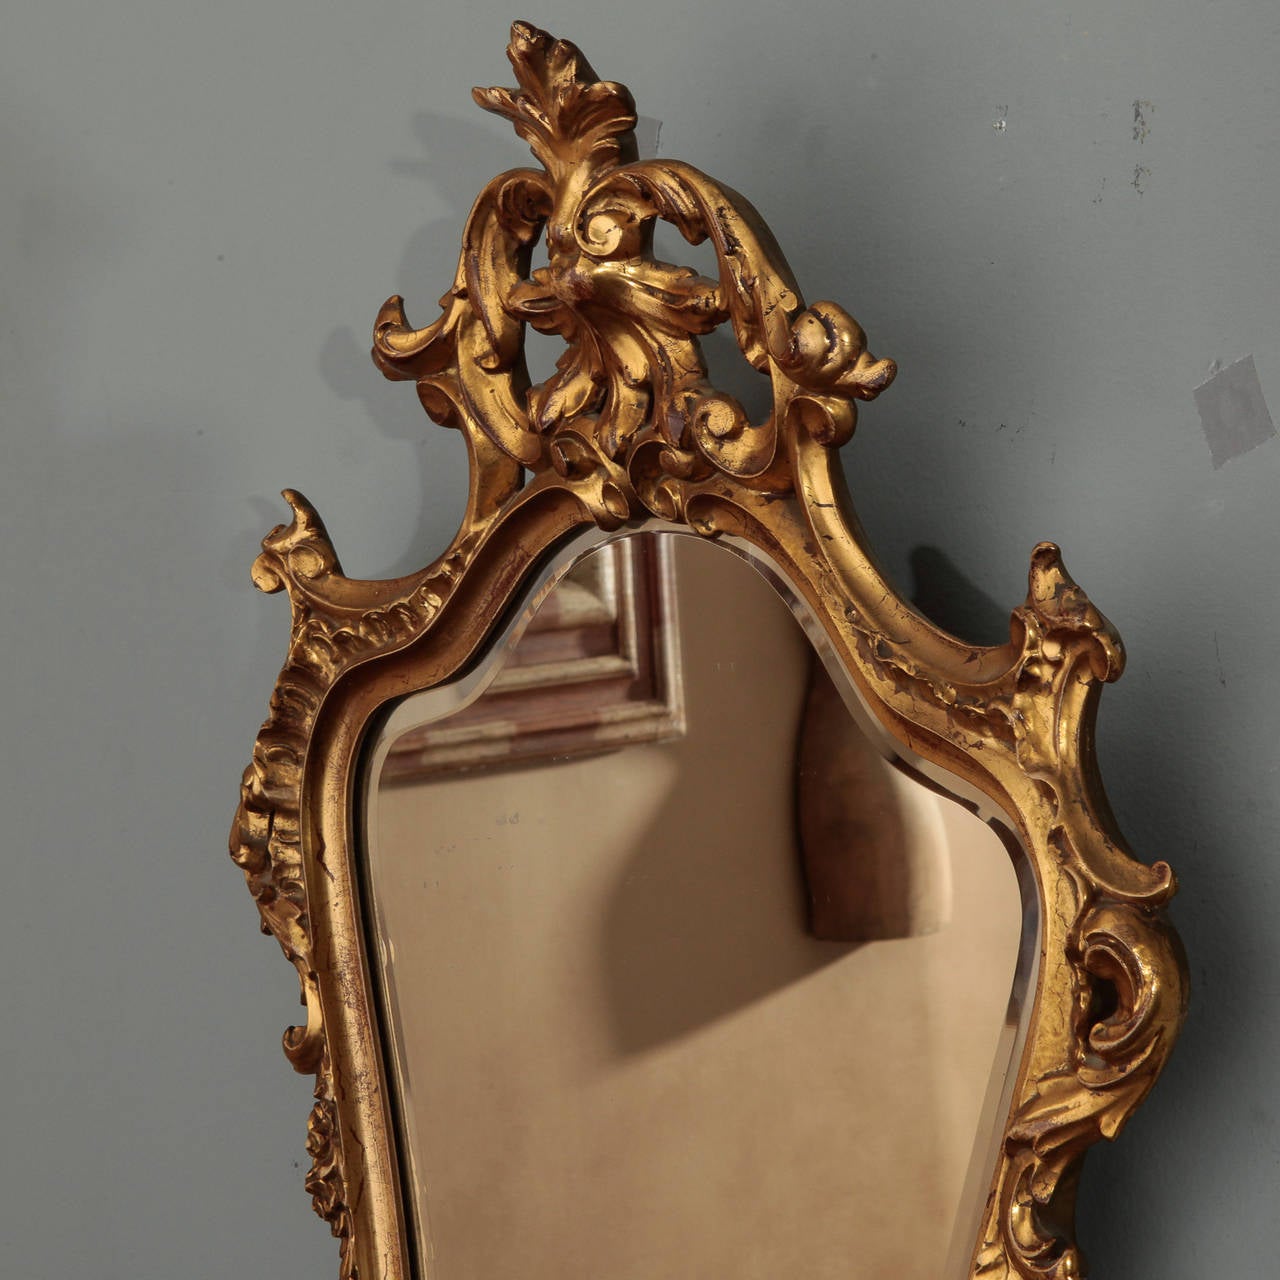 Circa 1920s French mirror with gilded wood and resin frame. Beveled edge mirror.